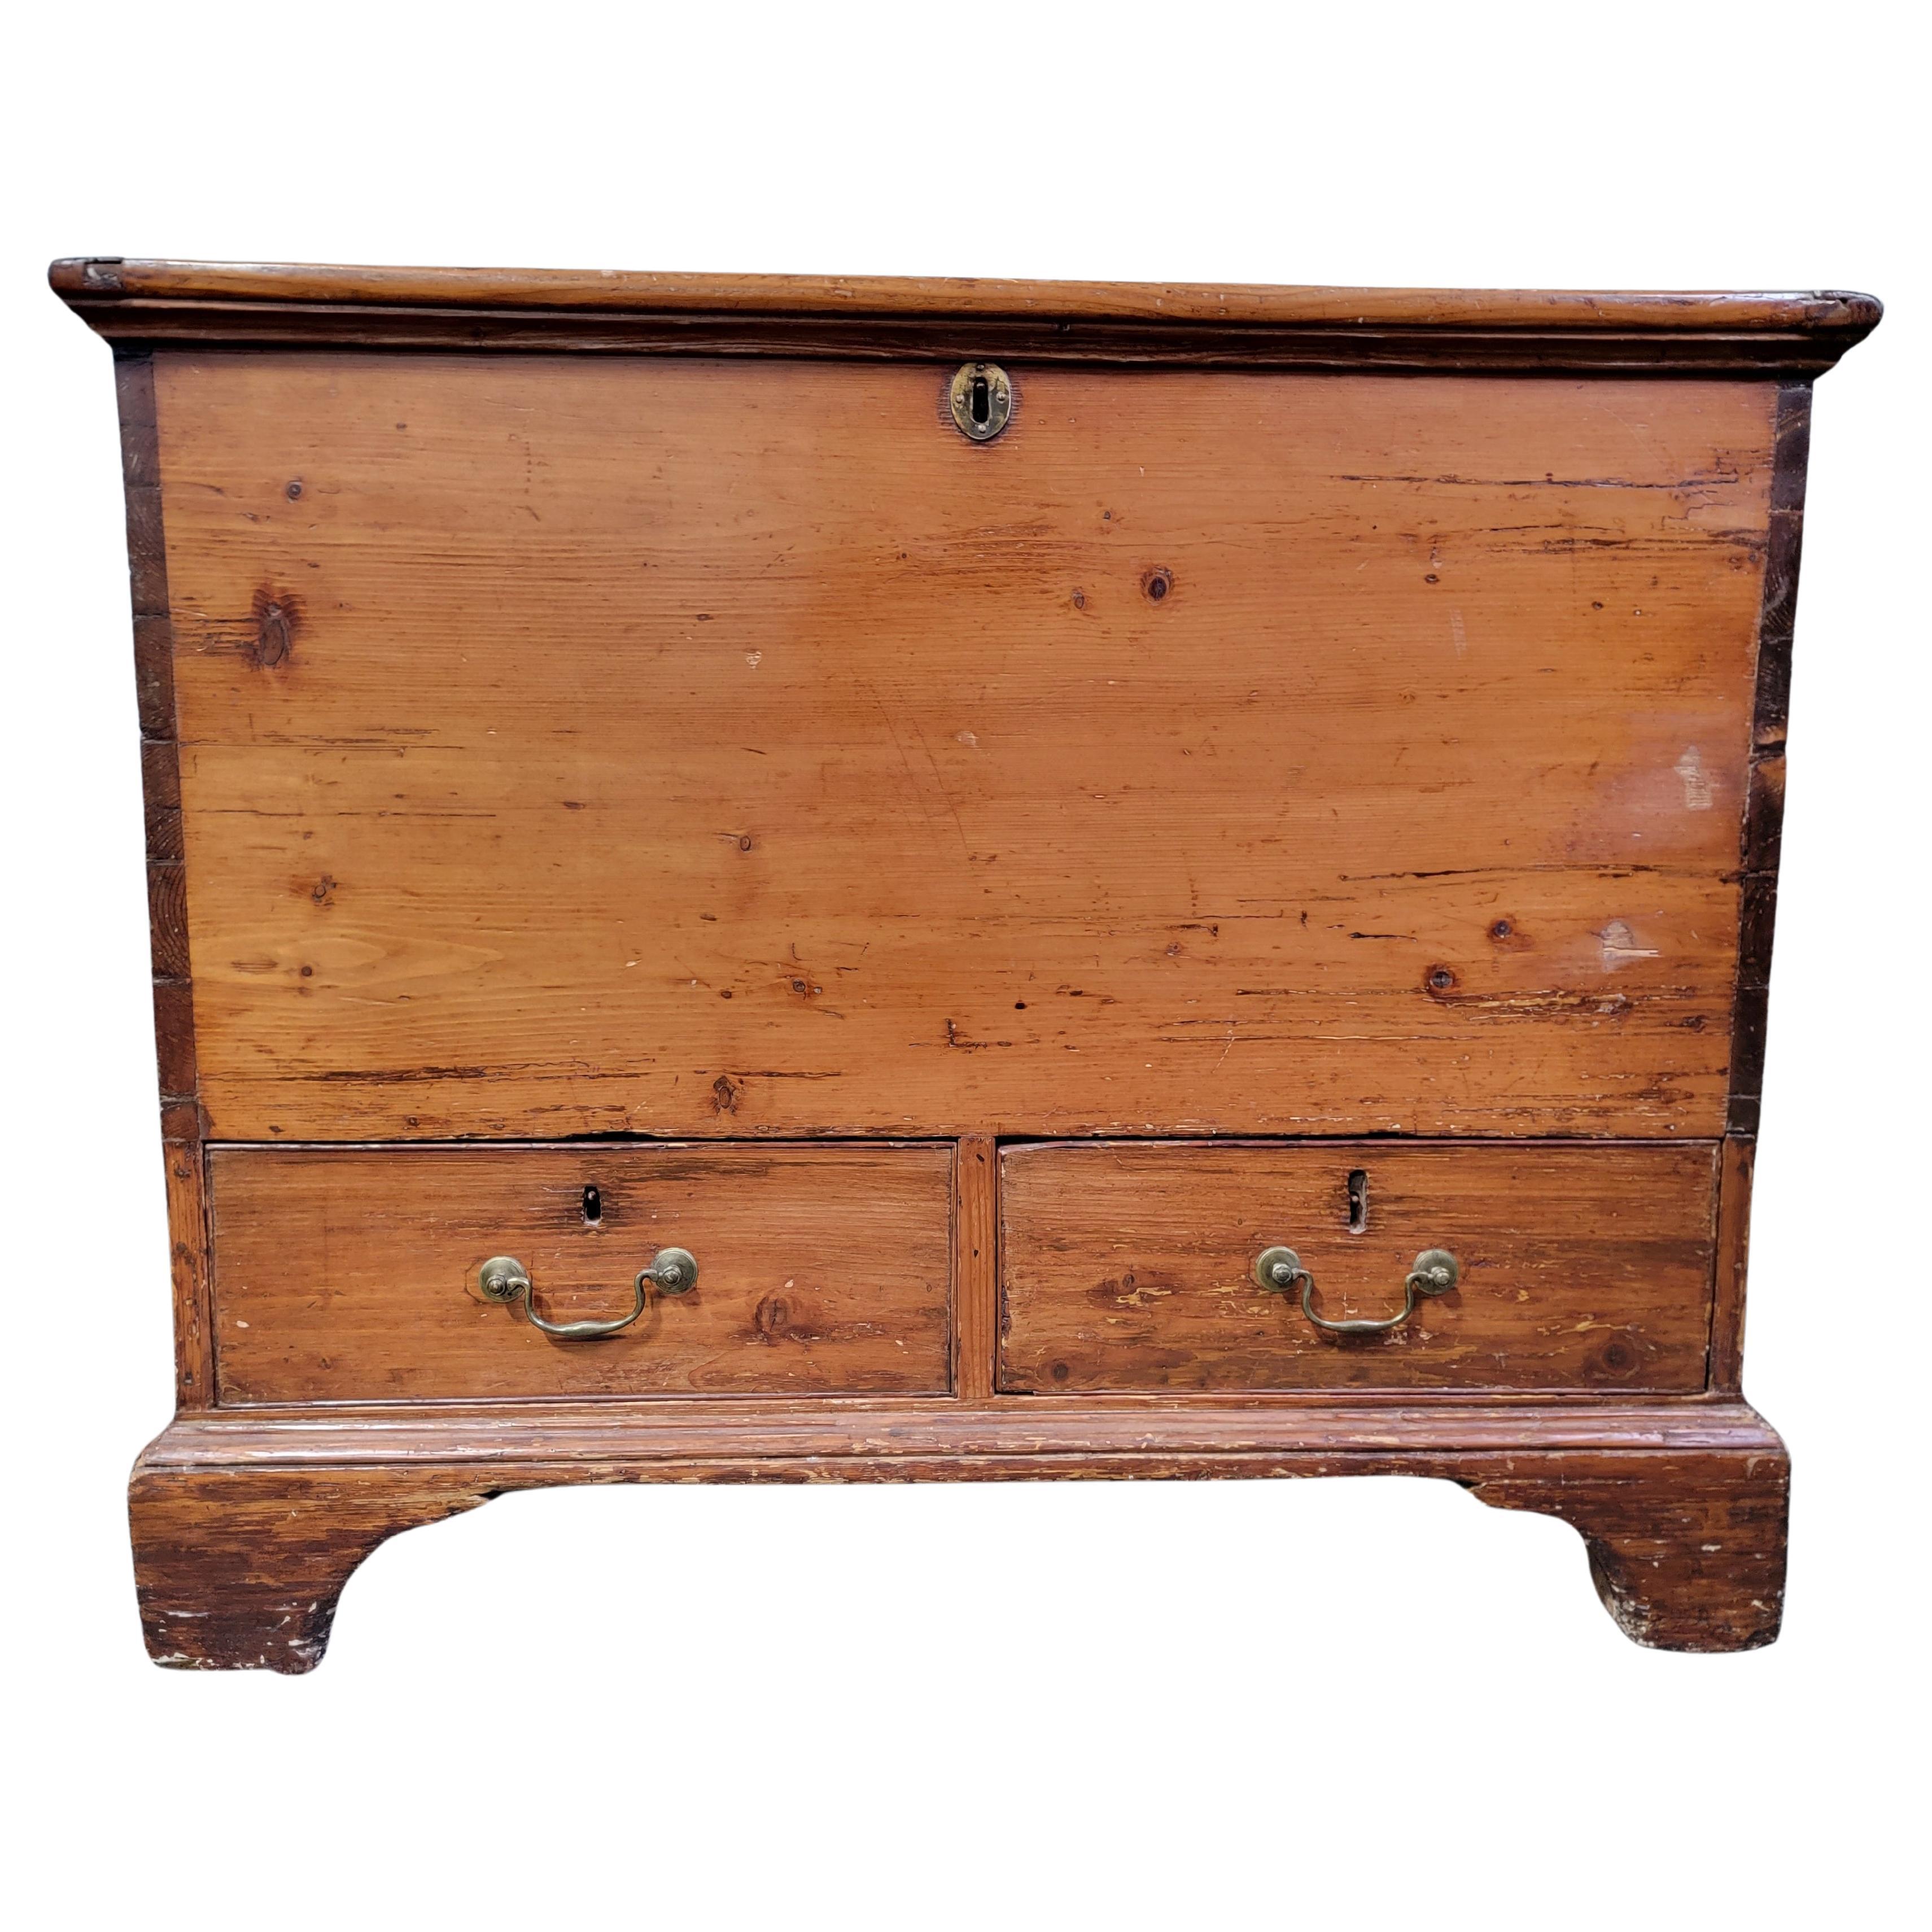 Early American Pine Blanket Chest / Trunk For Sale